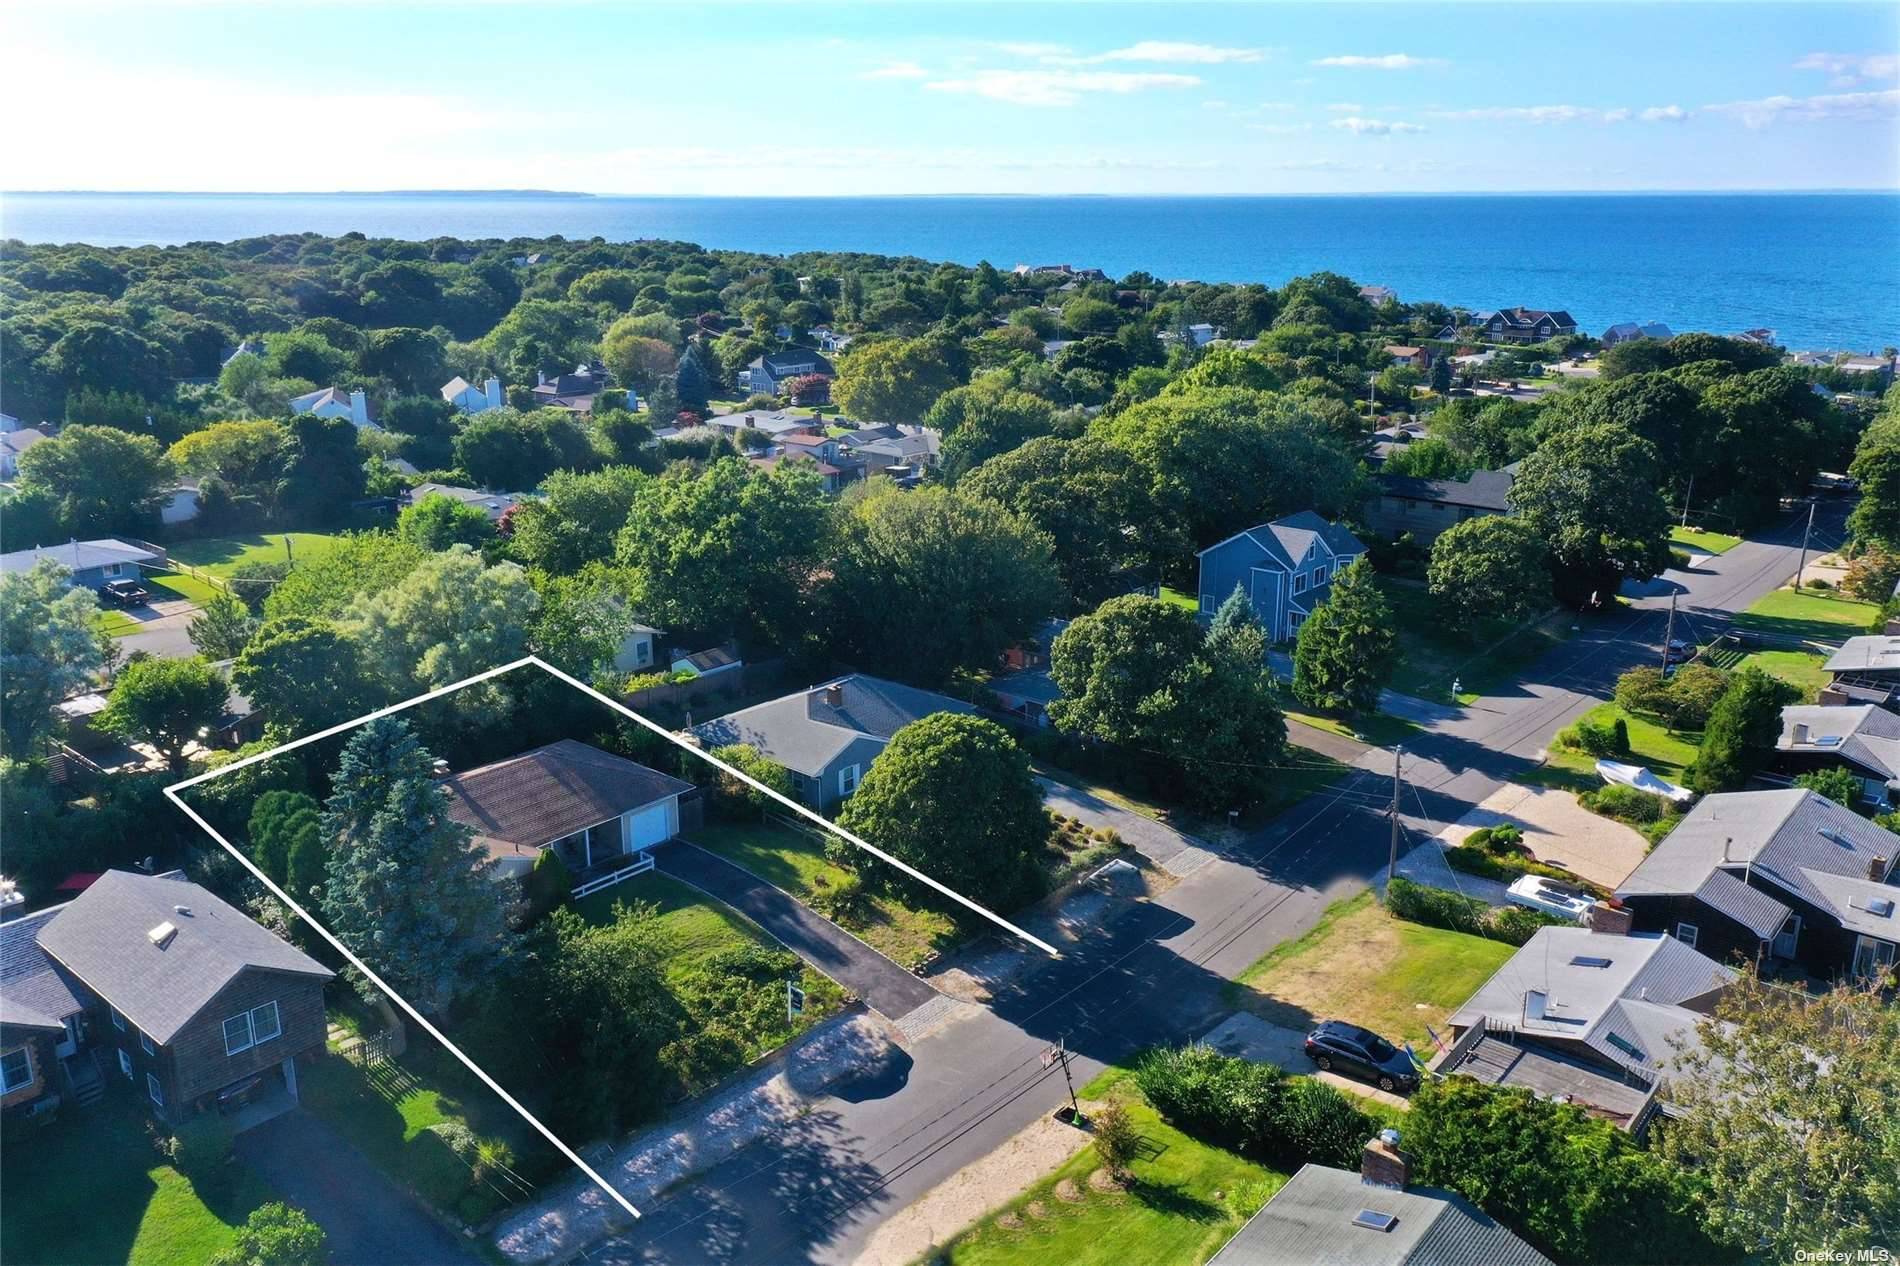 Montauk beach house consisting of three bedrooms, two full baths, living room with fireplace, kitchen, dining area and laundry room.